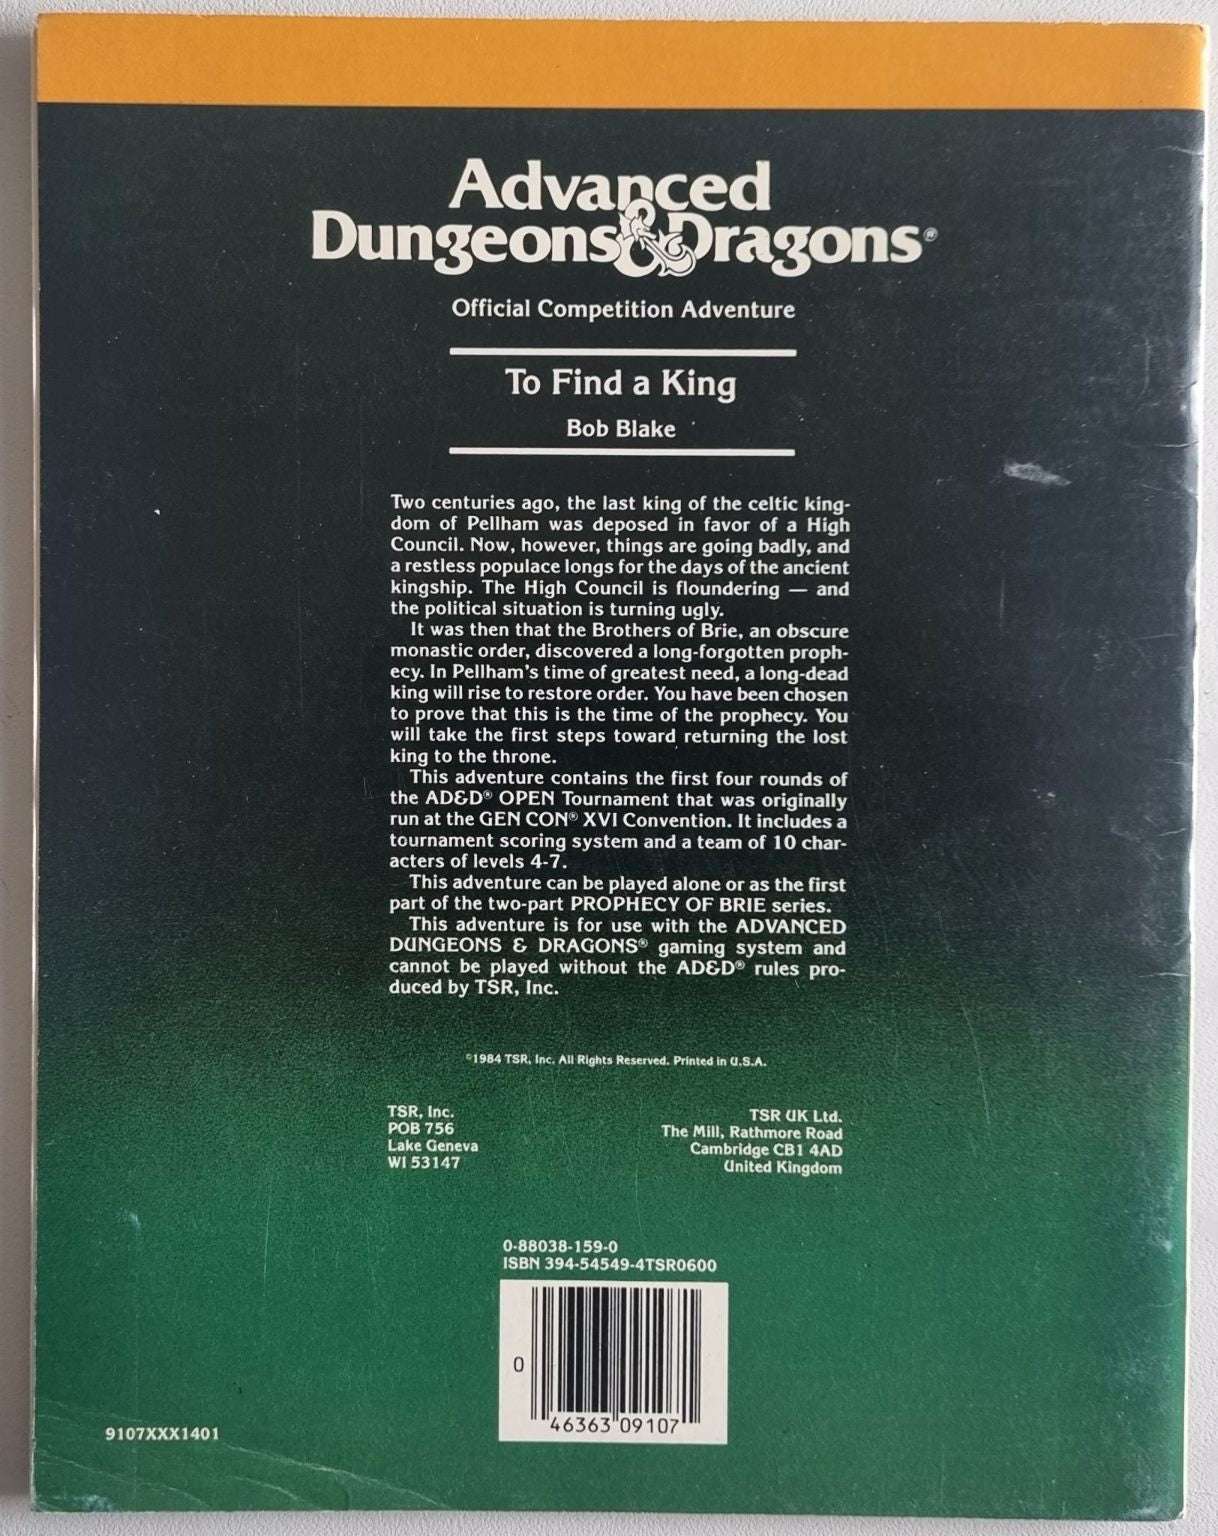 AD&D - Official Competition Adventure - To Find a King (C4 9107) Default Title